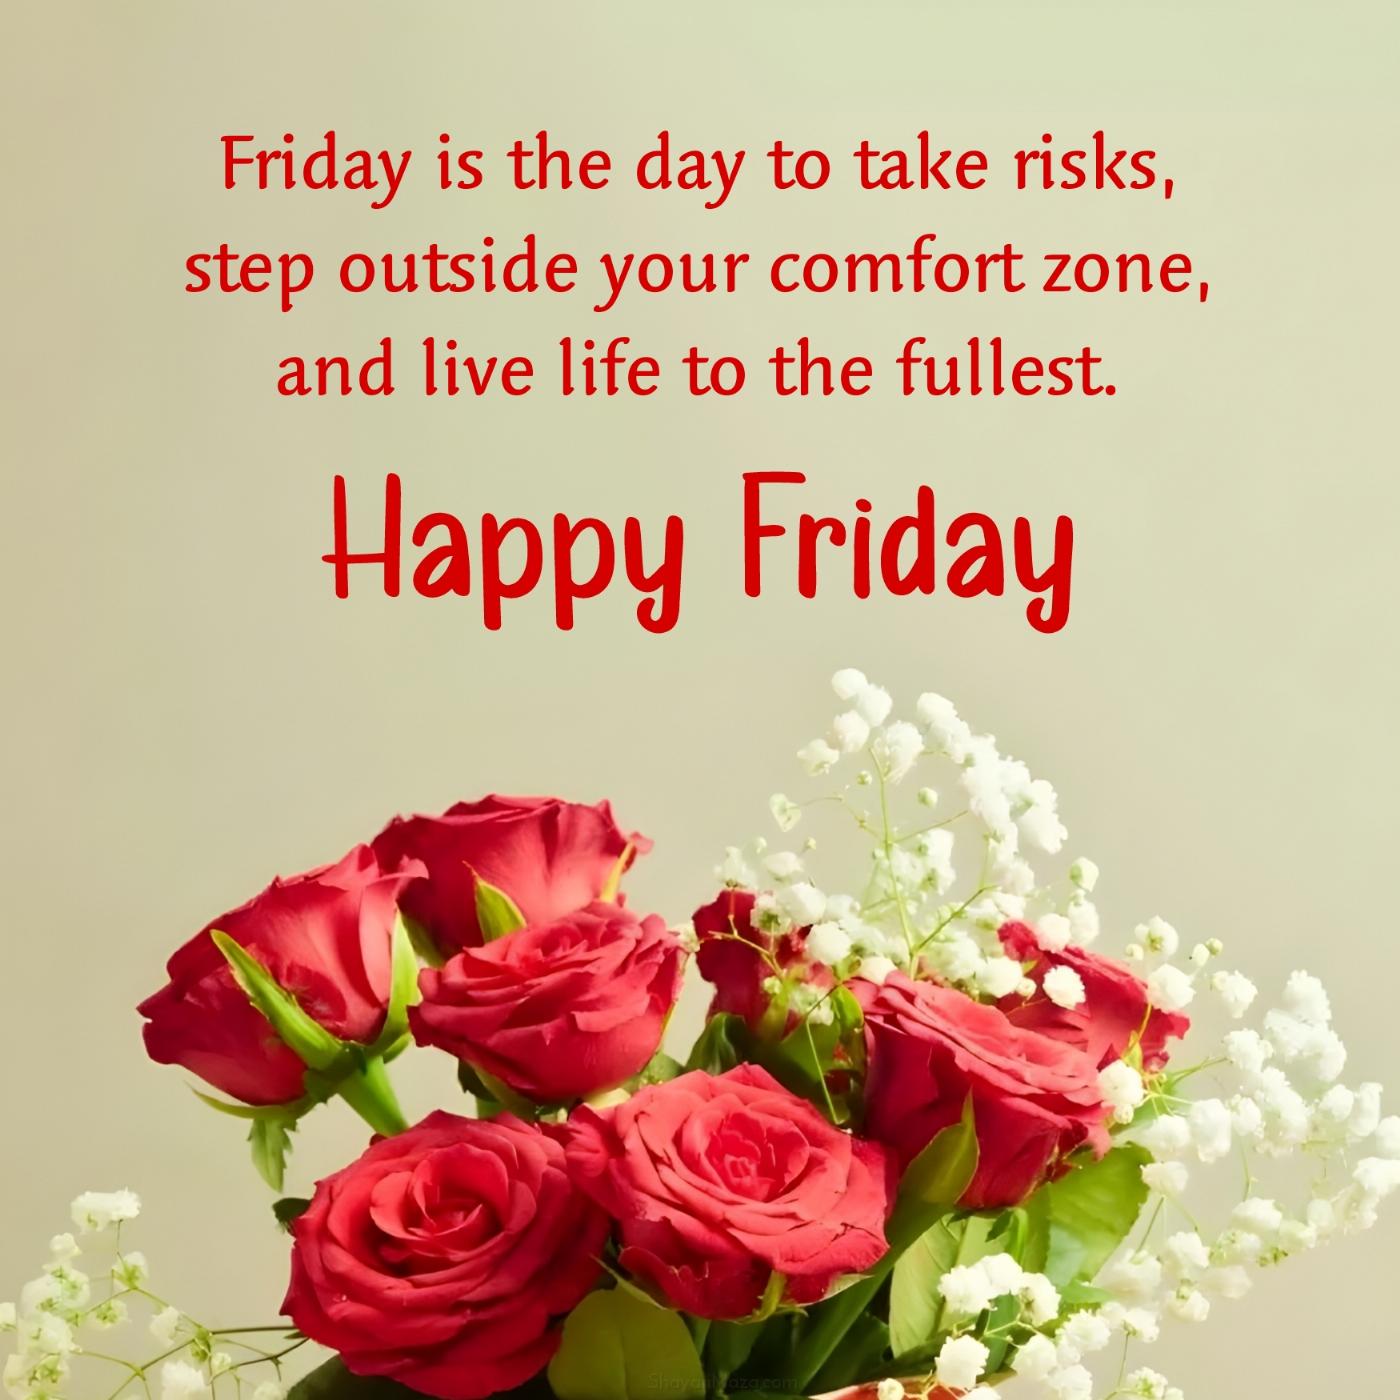 Friday is the day to take risks step outside your comfort zone